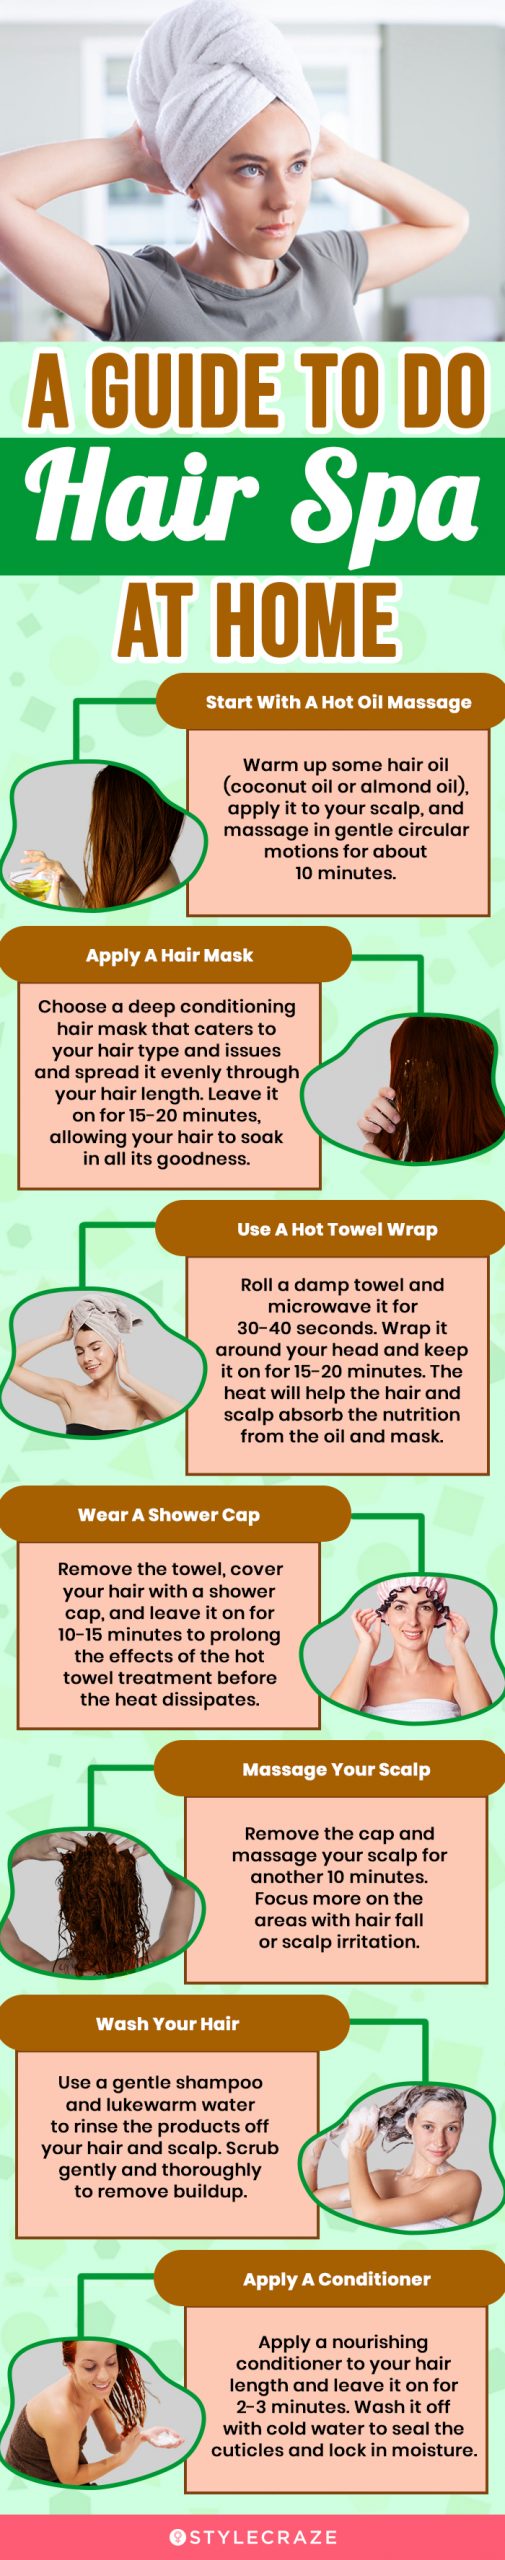 a guide to do hair spa at home (infographic)